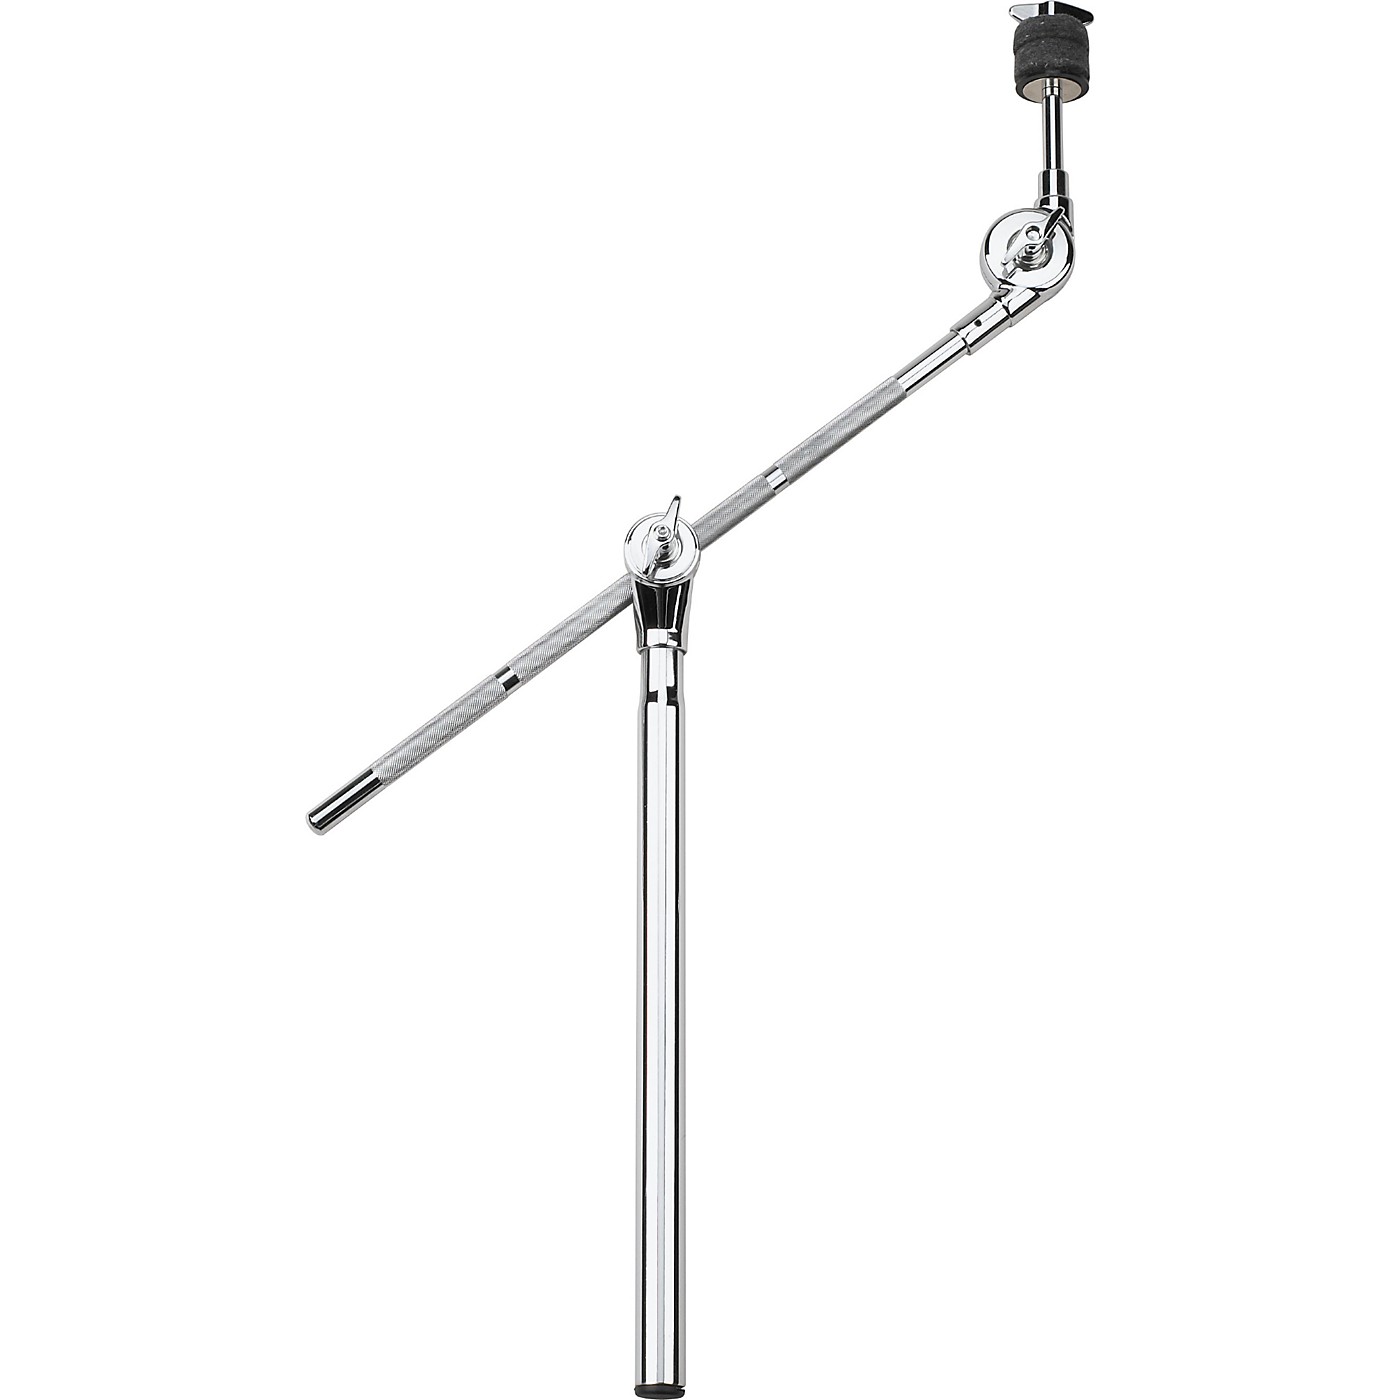 Sound Percussion Labs SPC20 Cymbal Boom Arm thumbnail